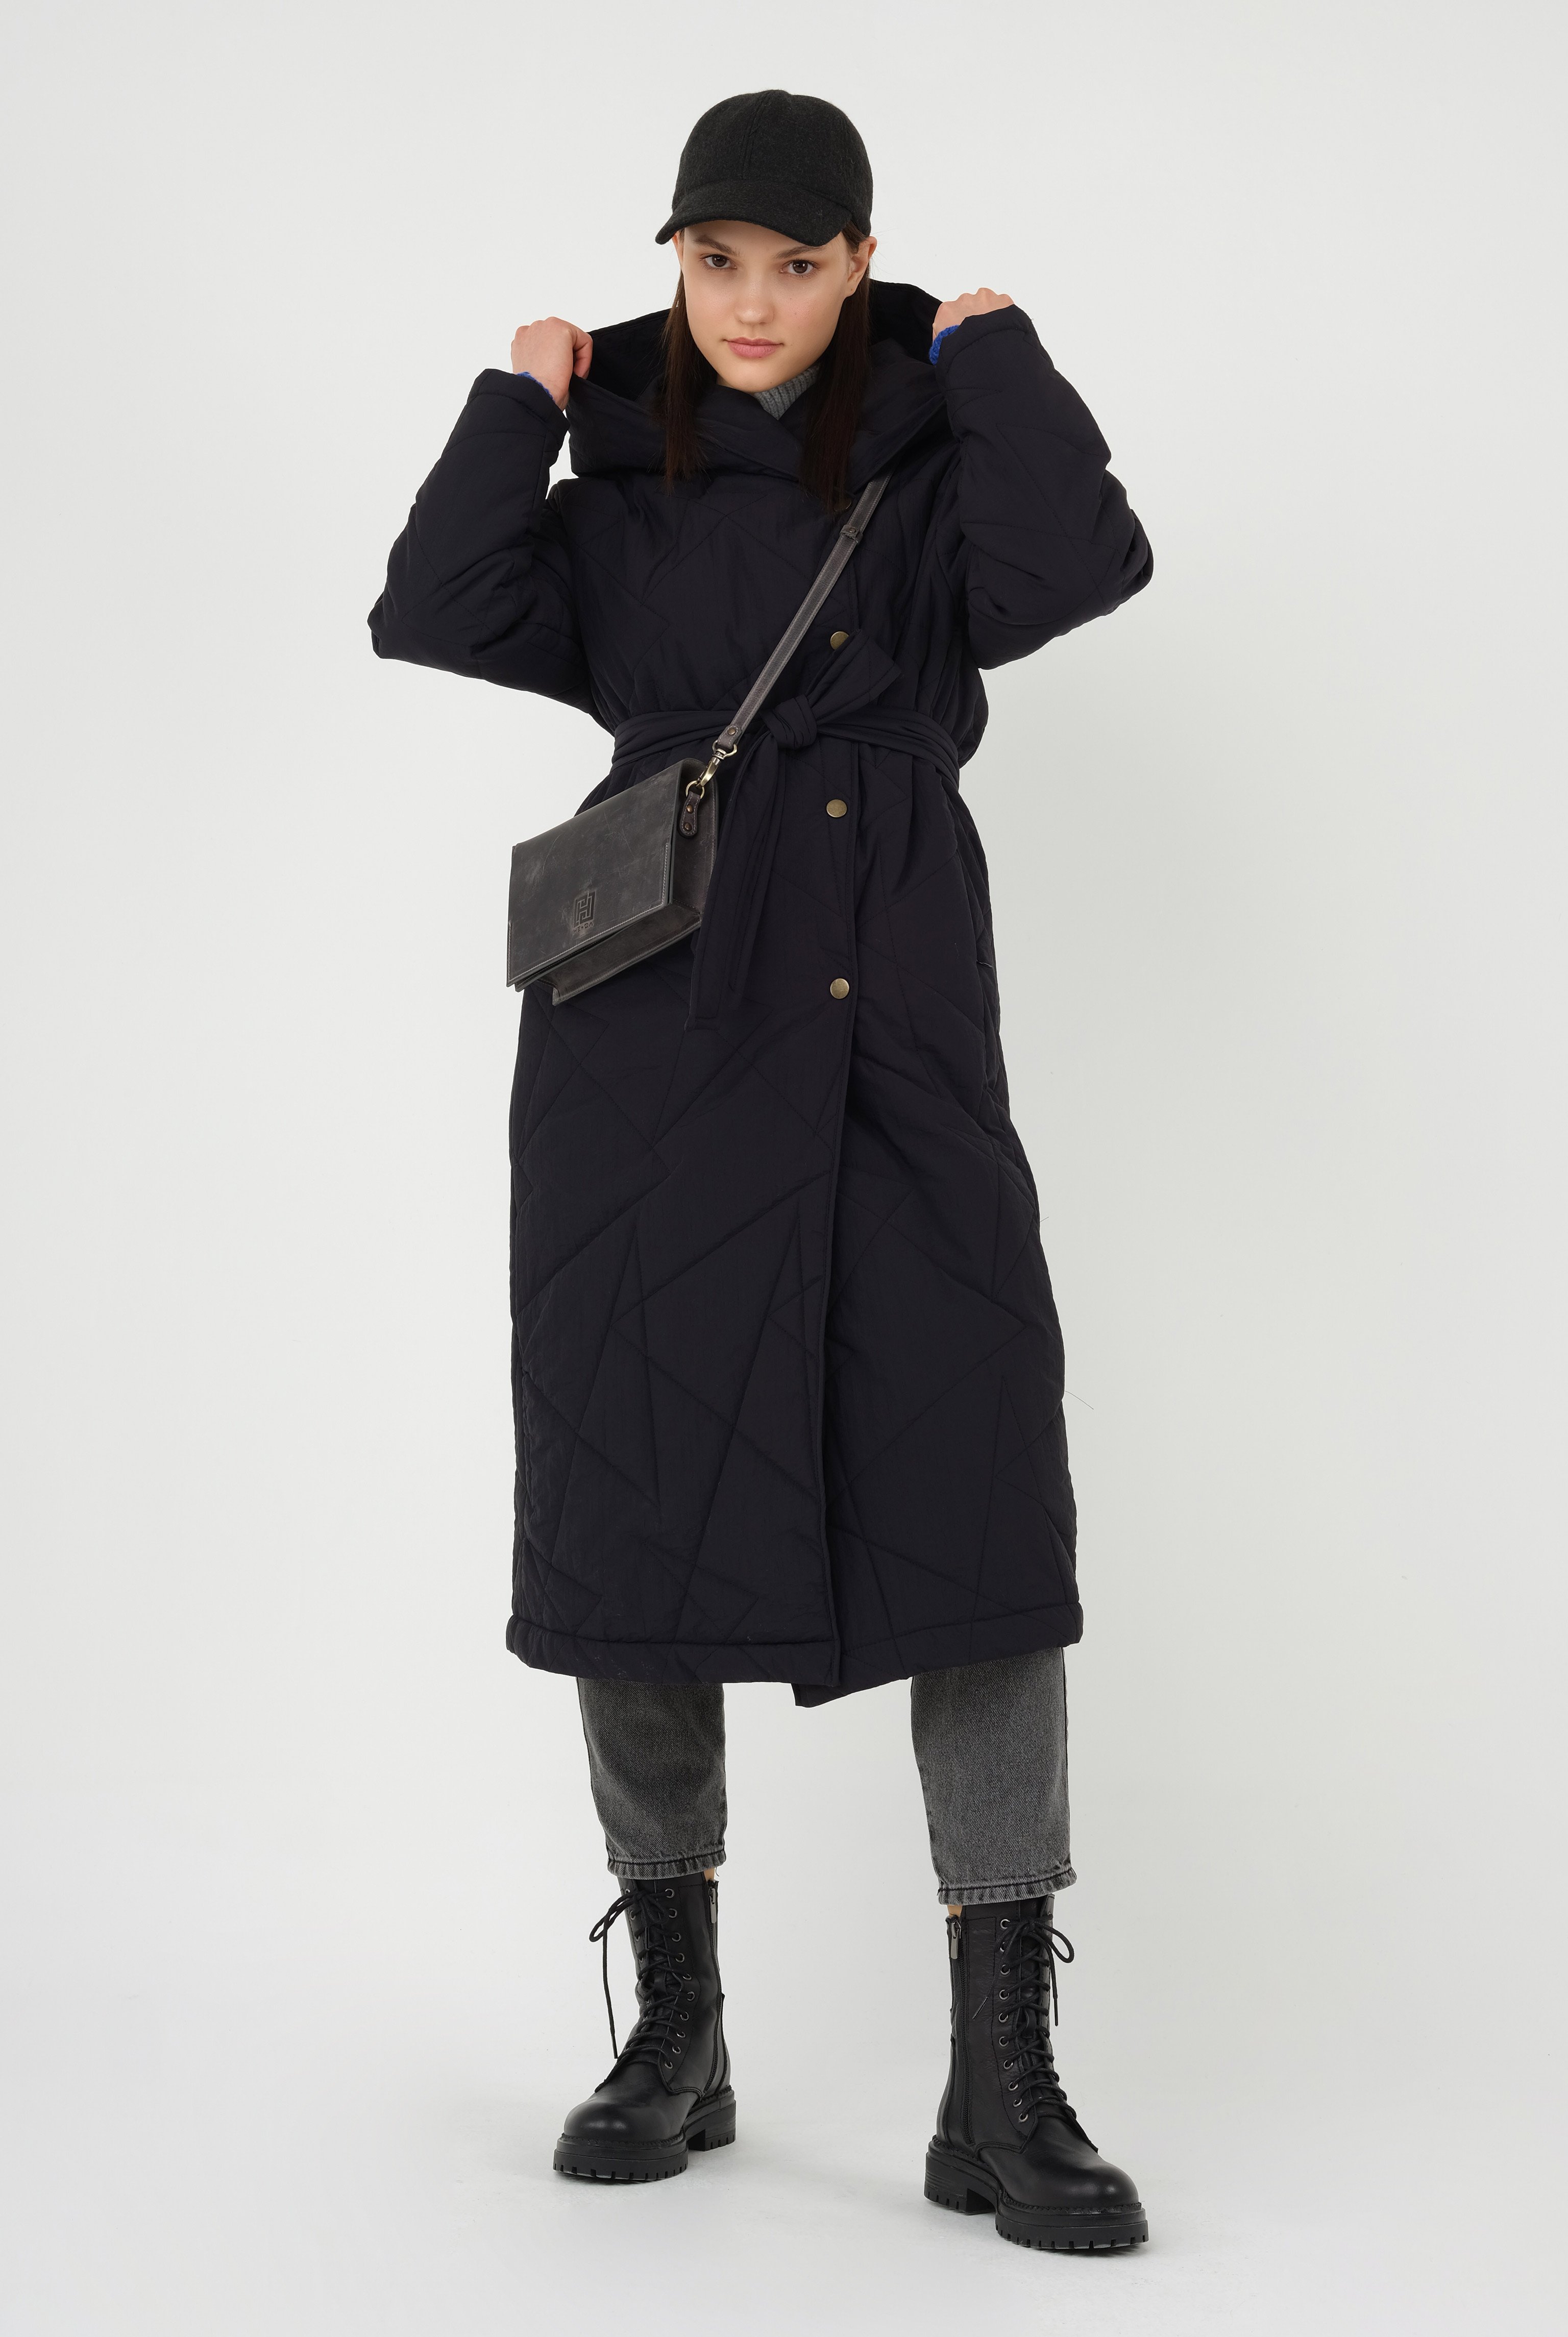 Asymmetric Patterned Quilted Coat Black 